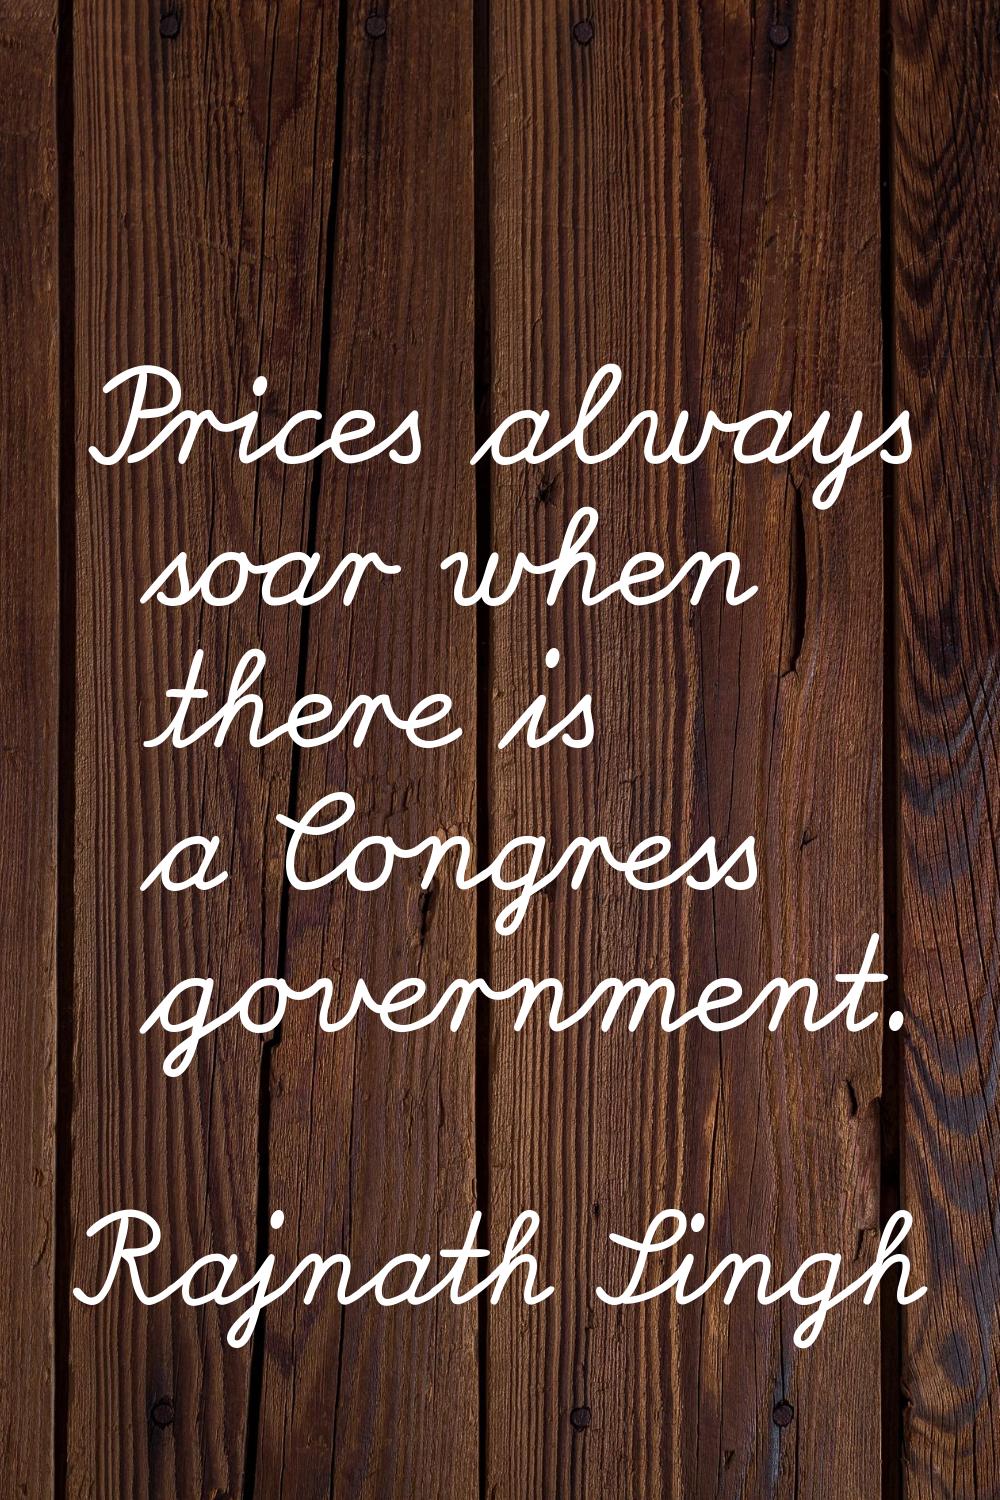 Prices always soar when there is a Congress government.